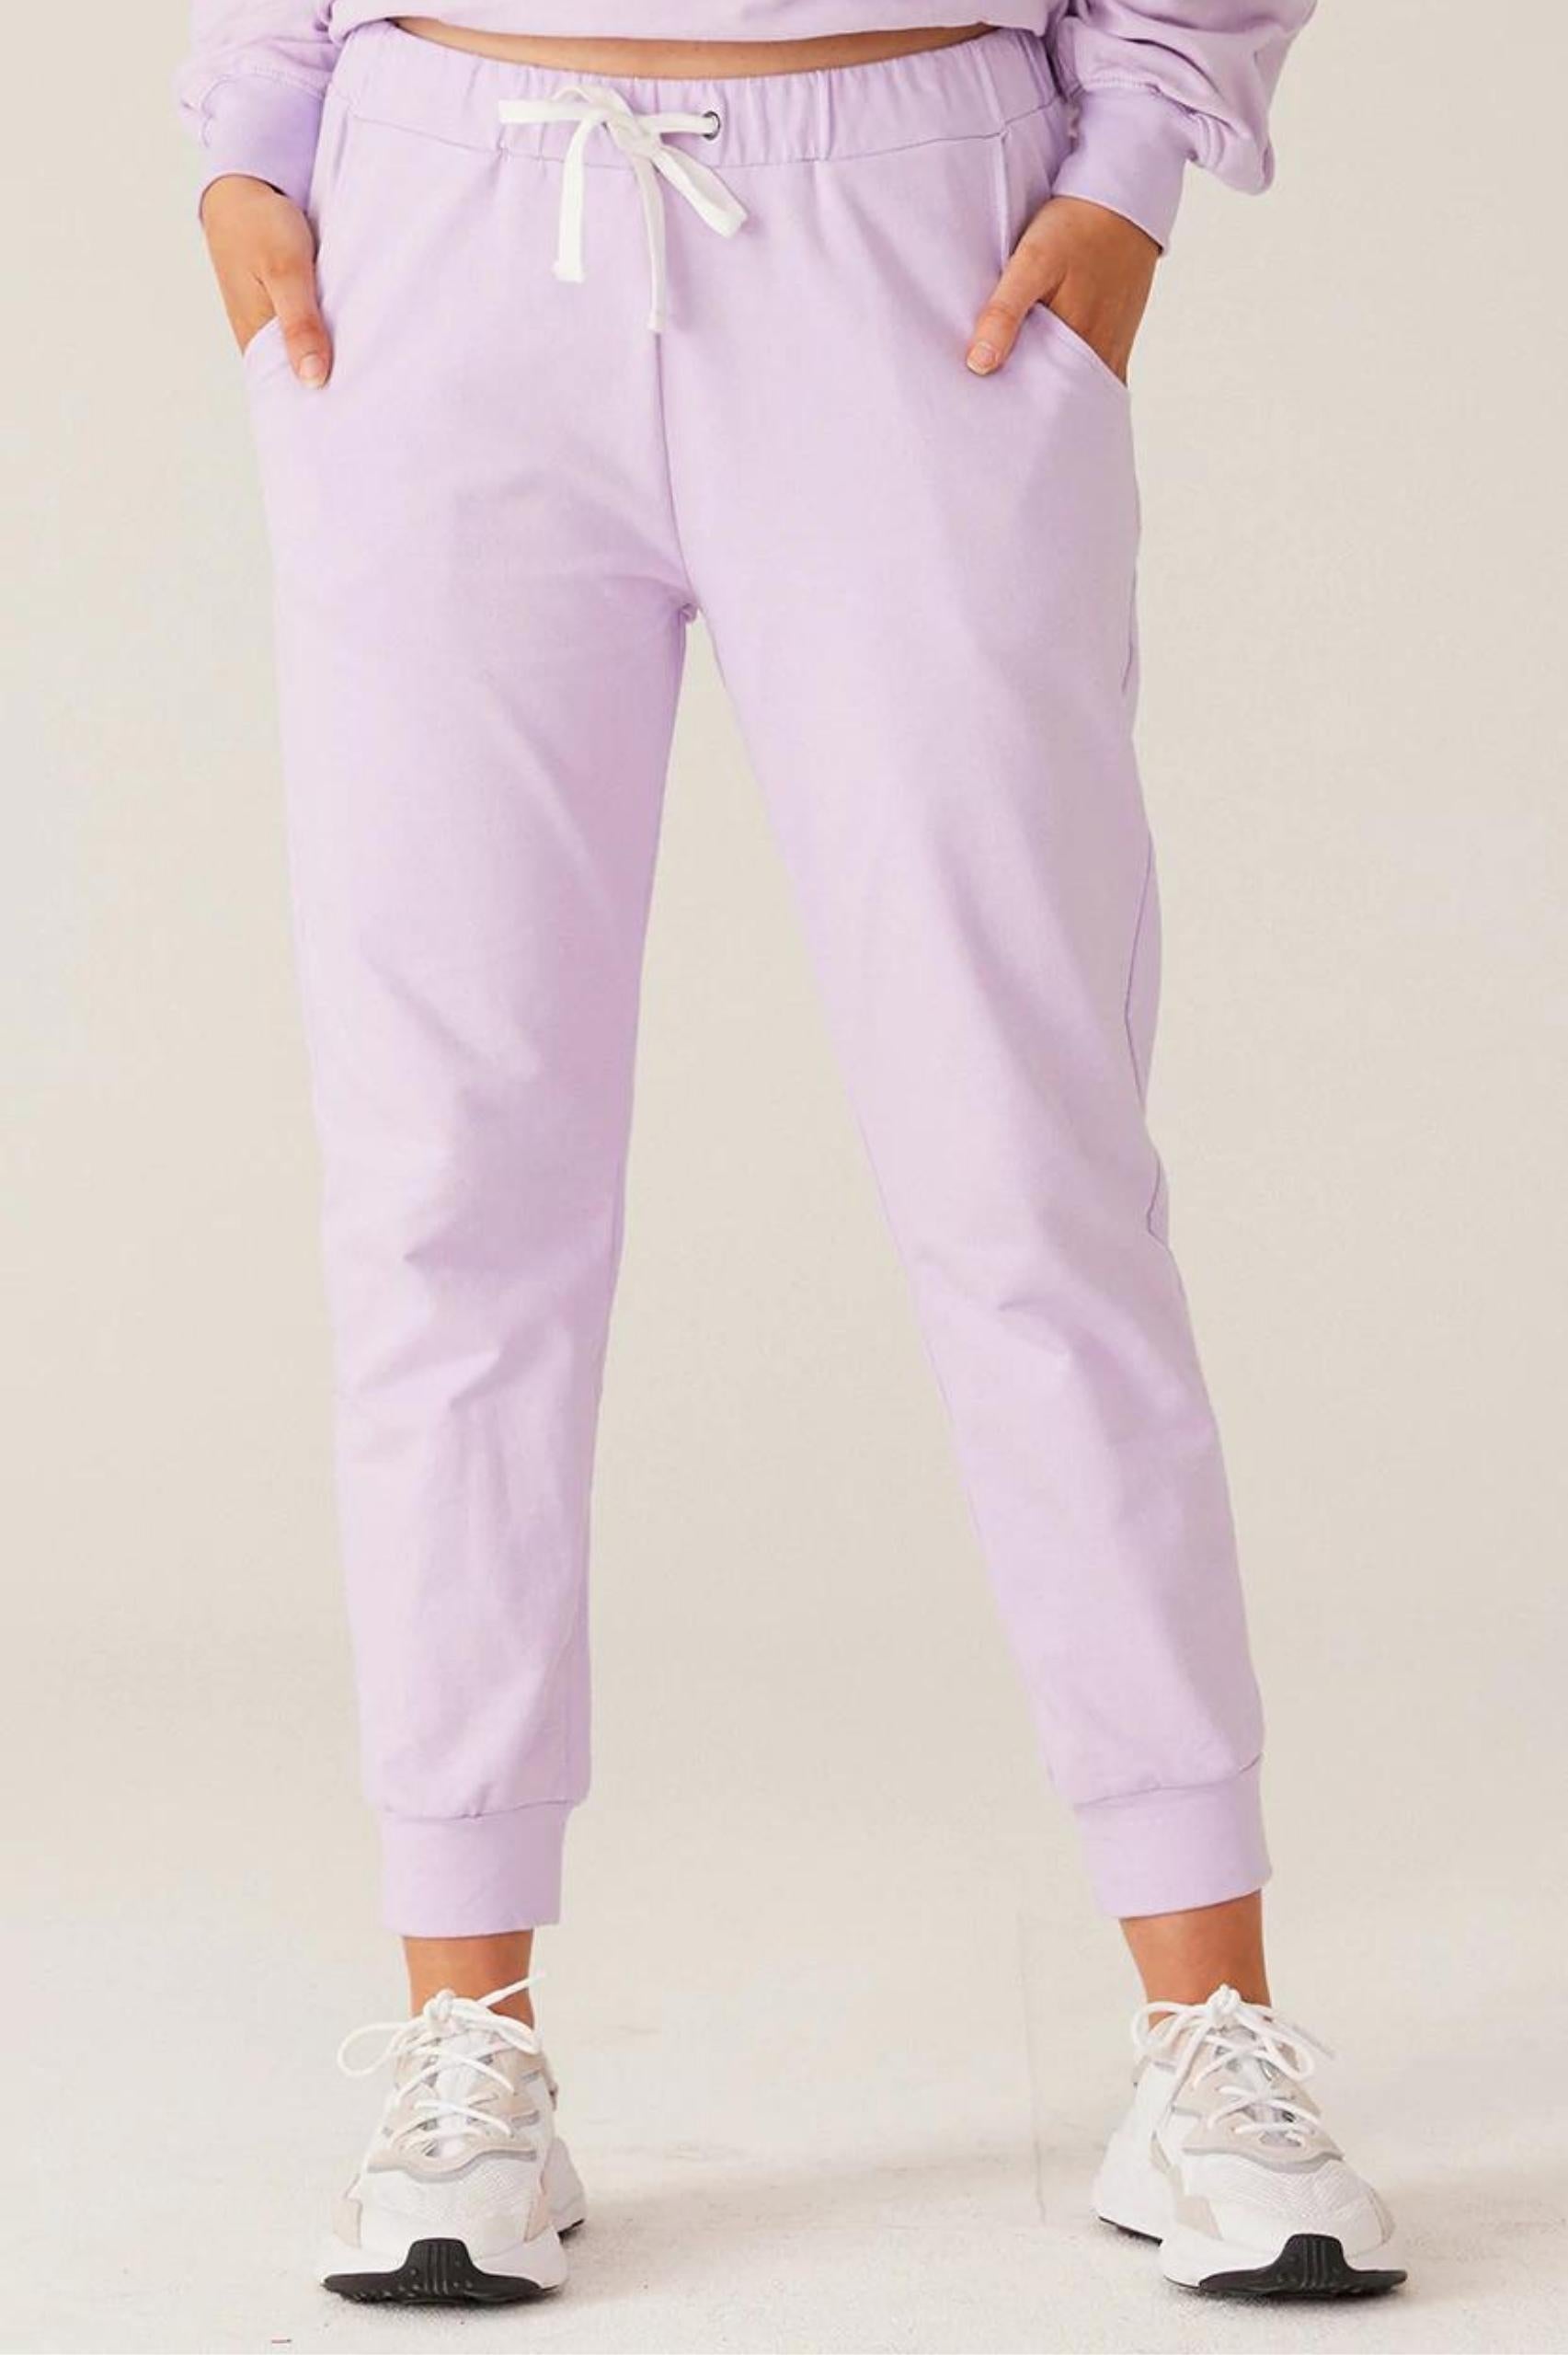 Cartel & Willow Poppy Jogger - Lilac